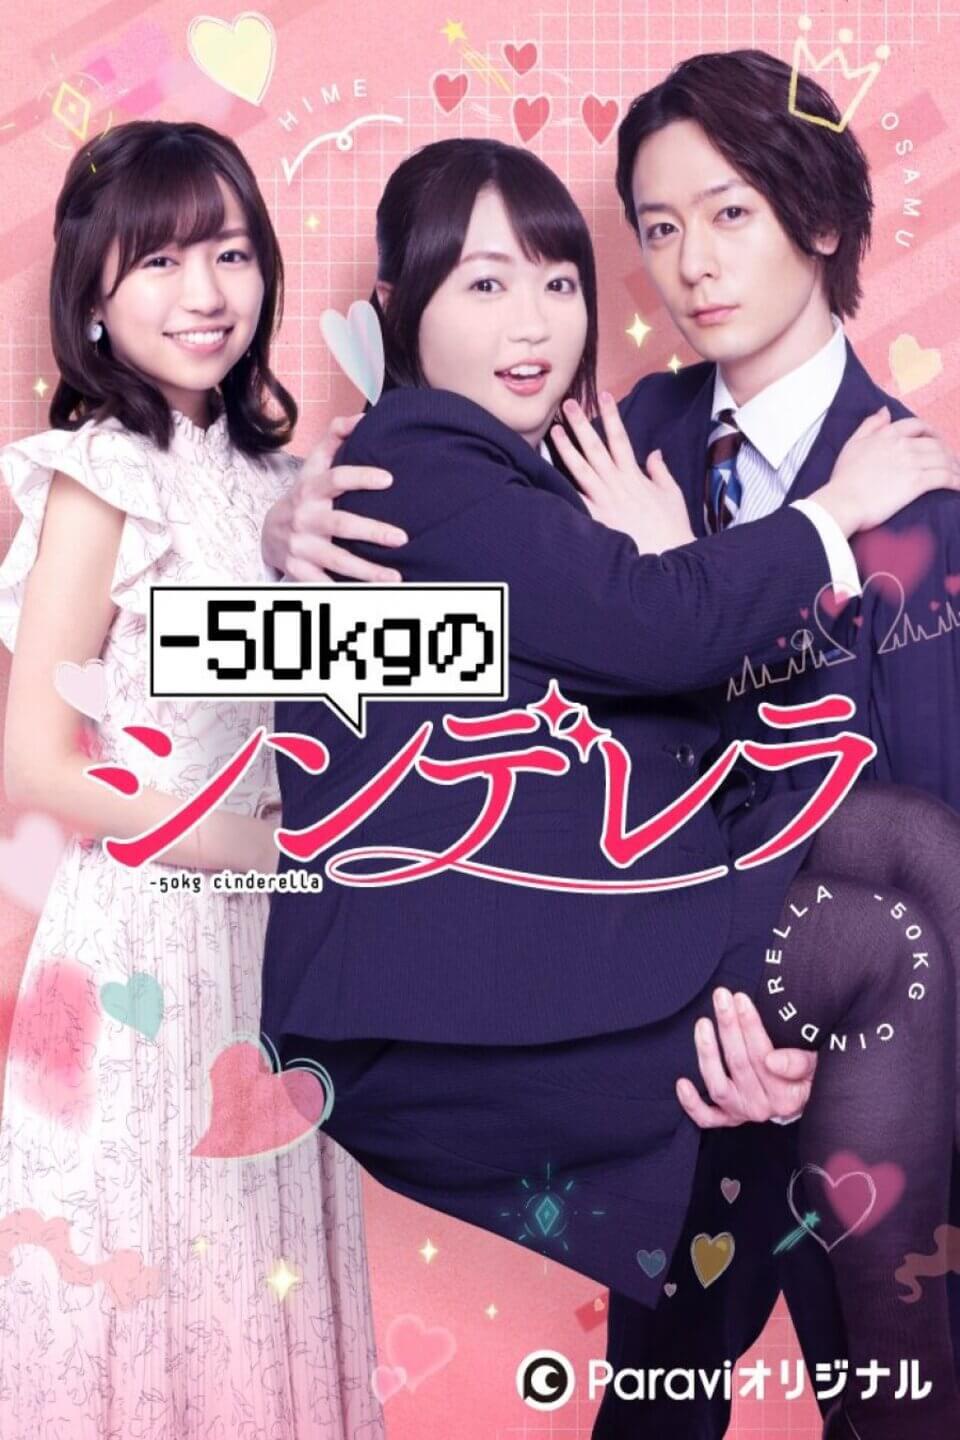 TV ratings for -50kg No Cinderella (－50kgのシンデレラ) in the United States. Paravi TV series